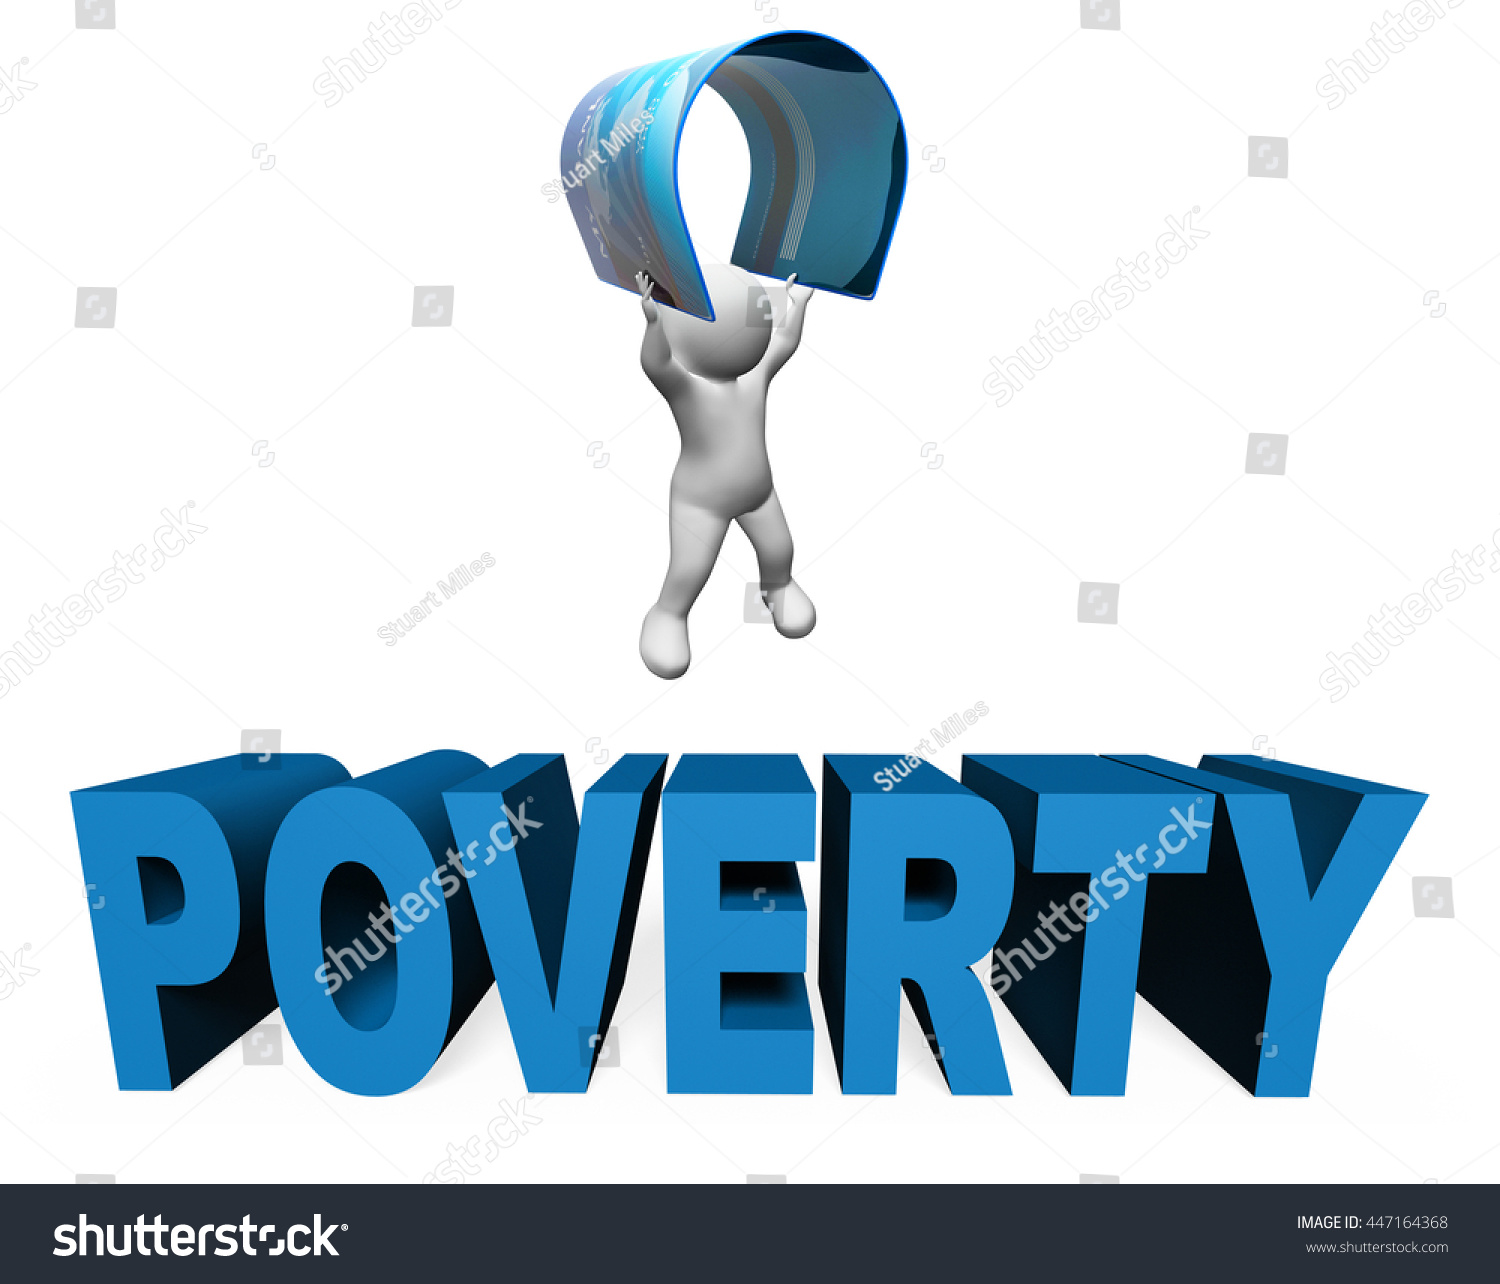 Image result for Image poverty and credit cards